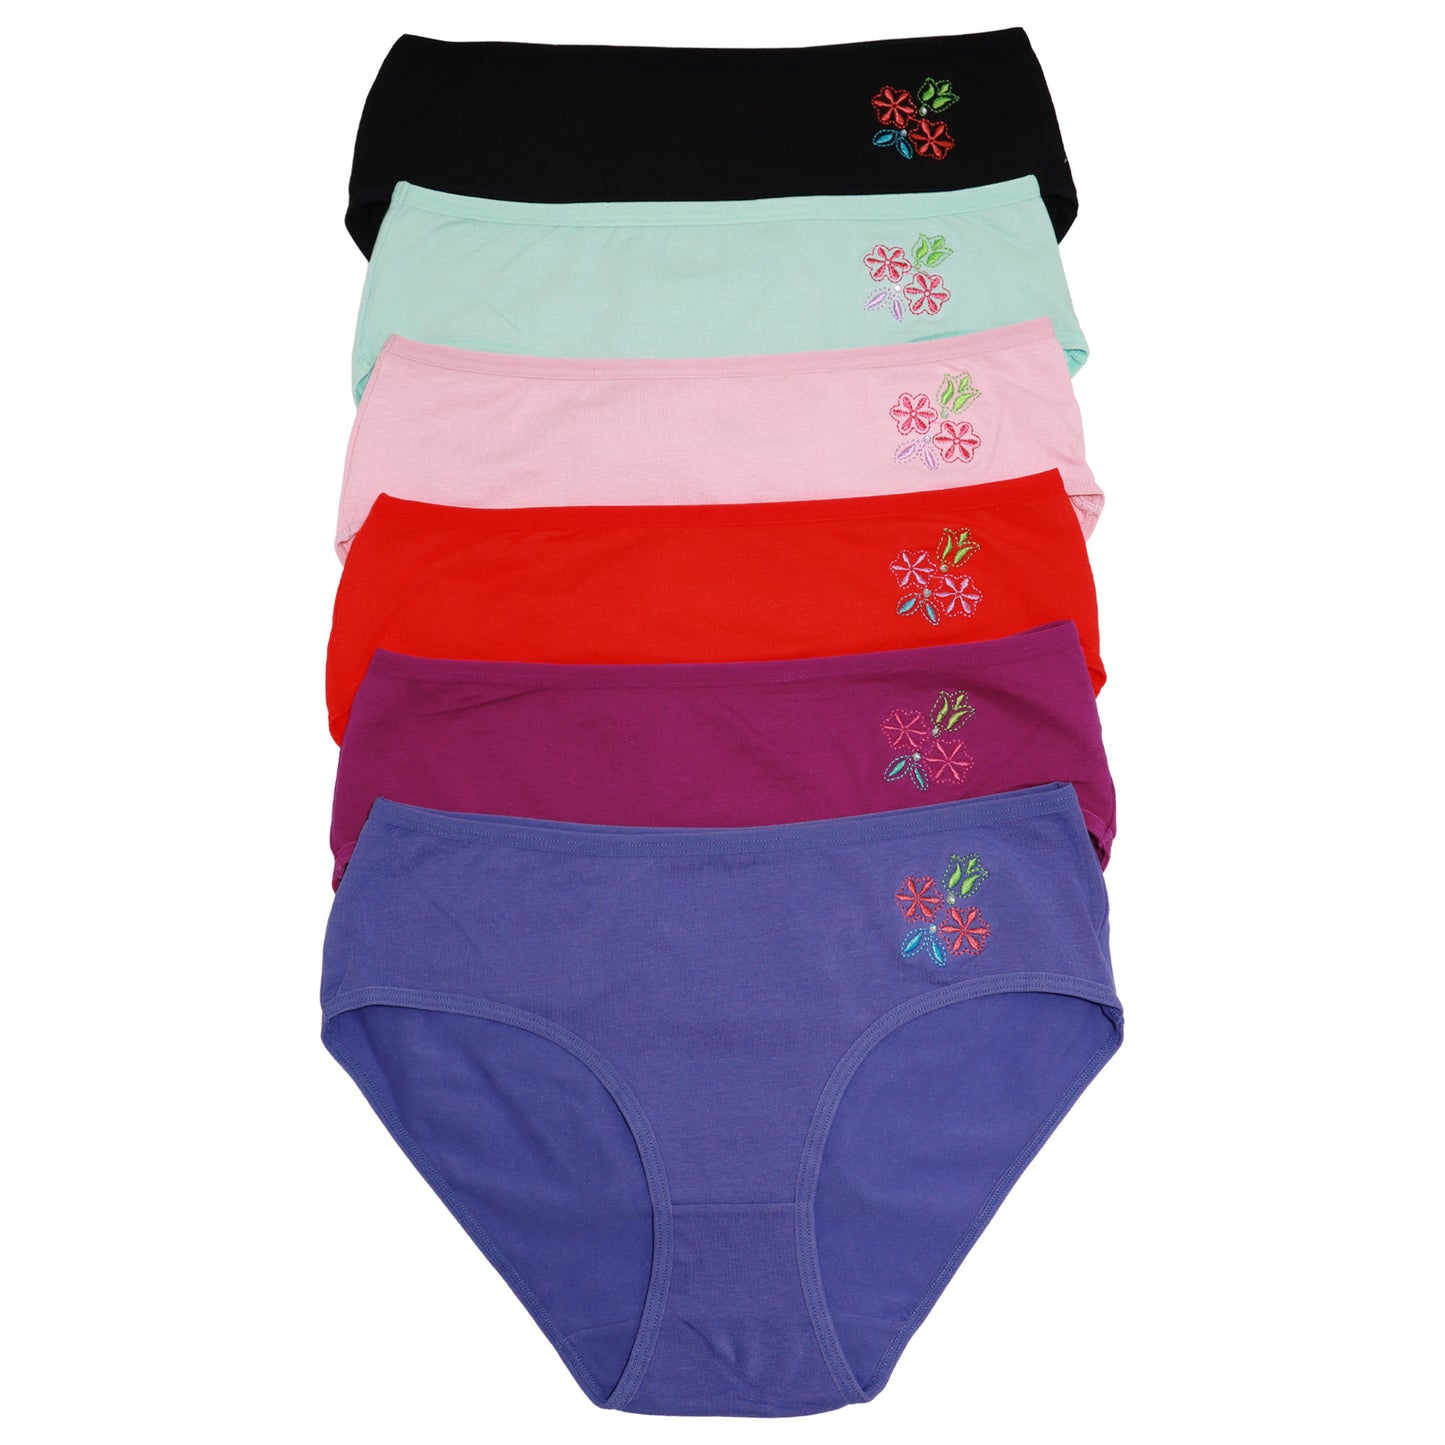 Cotton Embroidered Flowers Hiphugger (6-Pack)